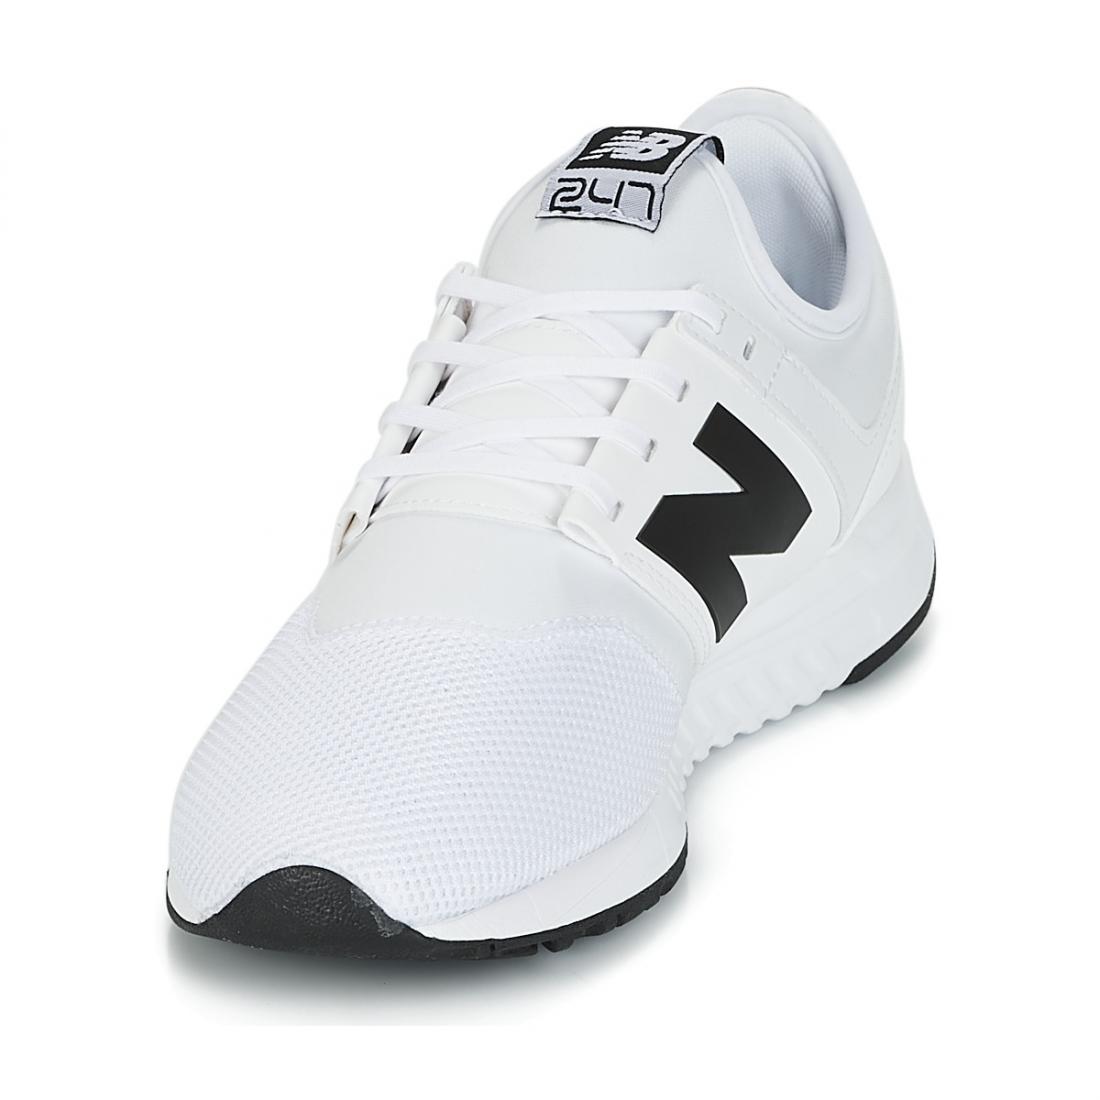 Homme Baskets mode | New Balance mrl247 white < Adascooters